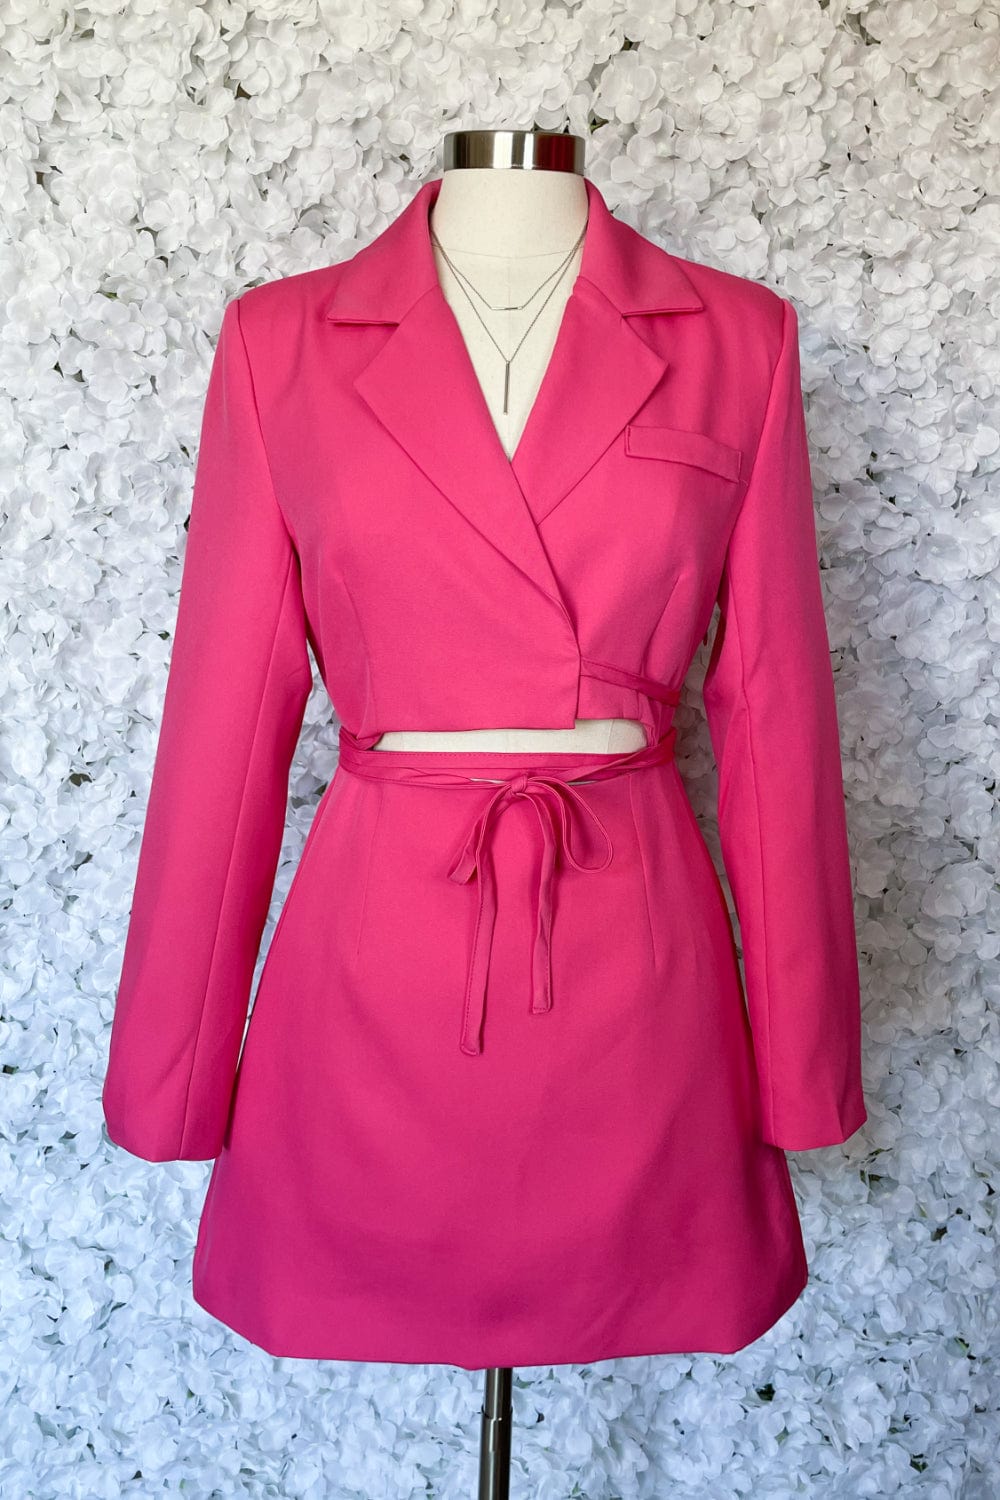 Sapphire Hot Pink Blazer Cut Out Dress - Dresses - Blooming Daily